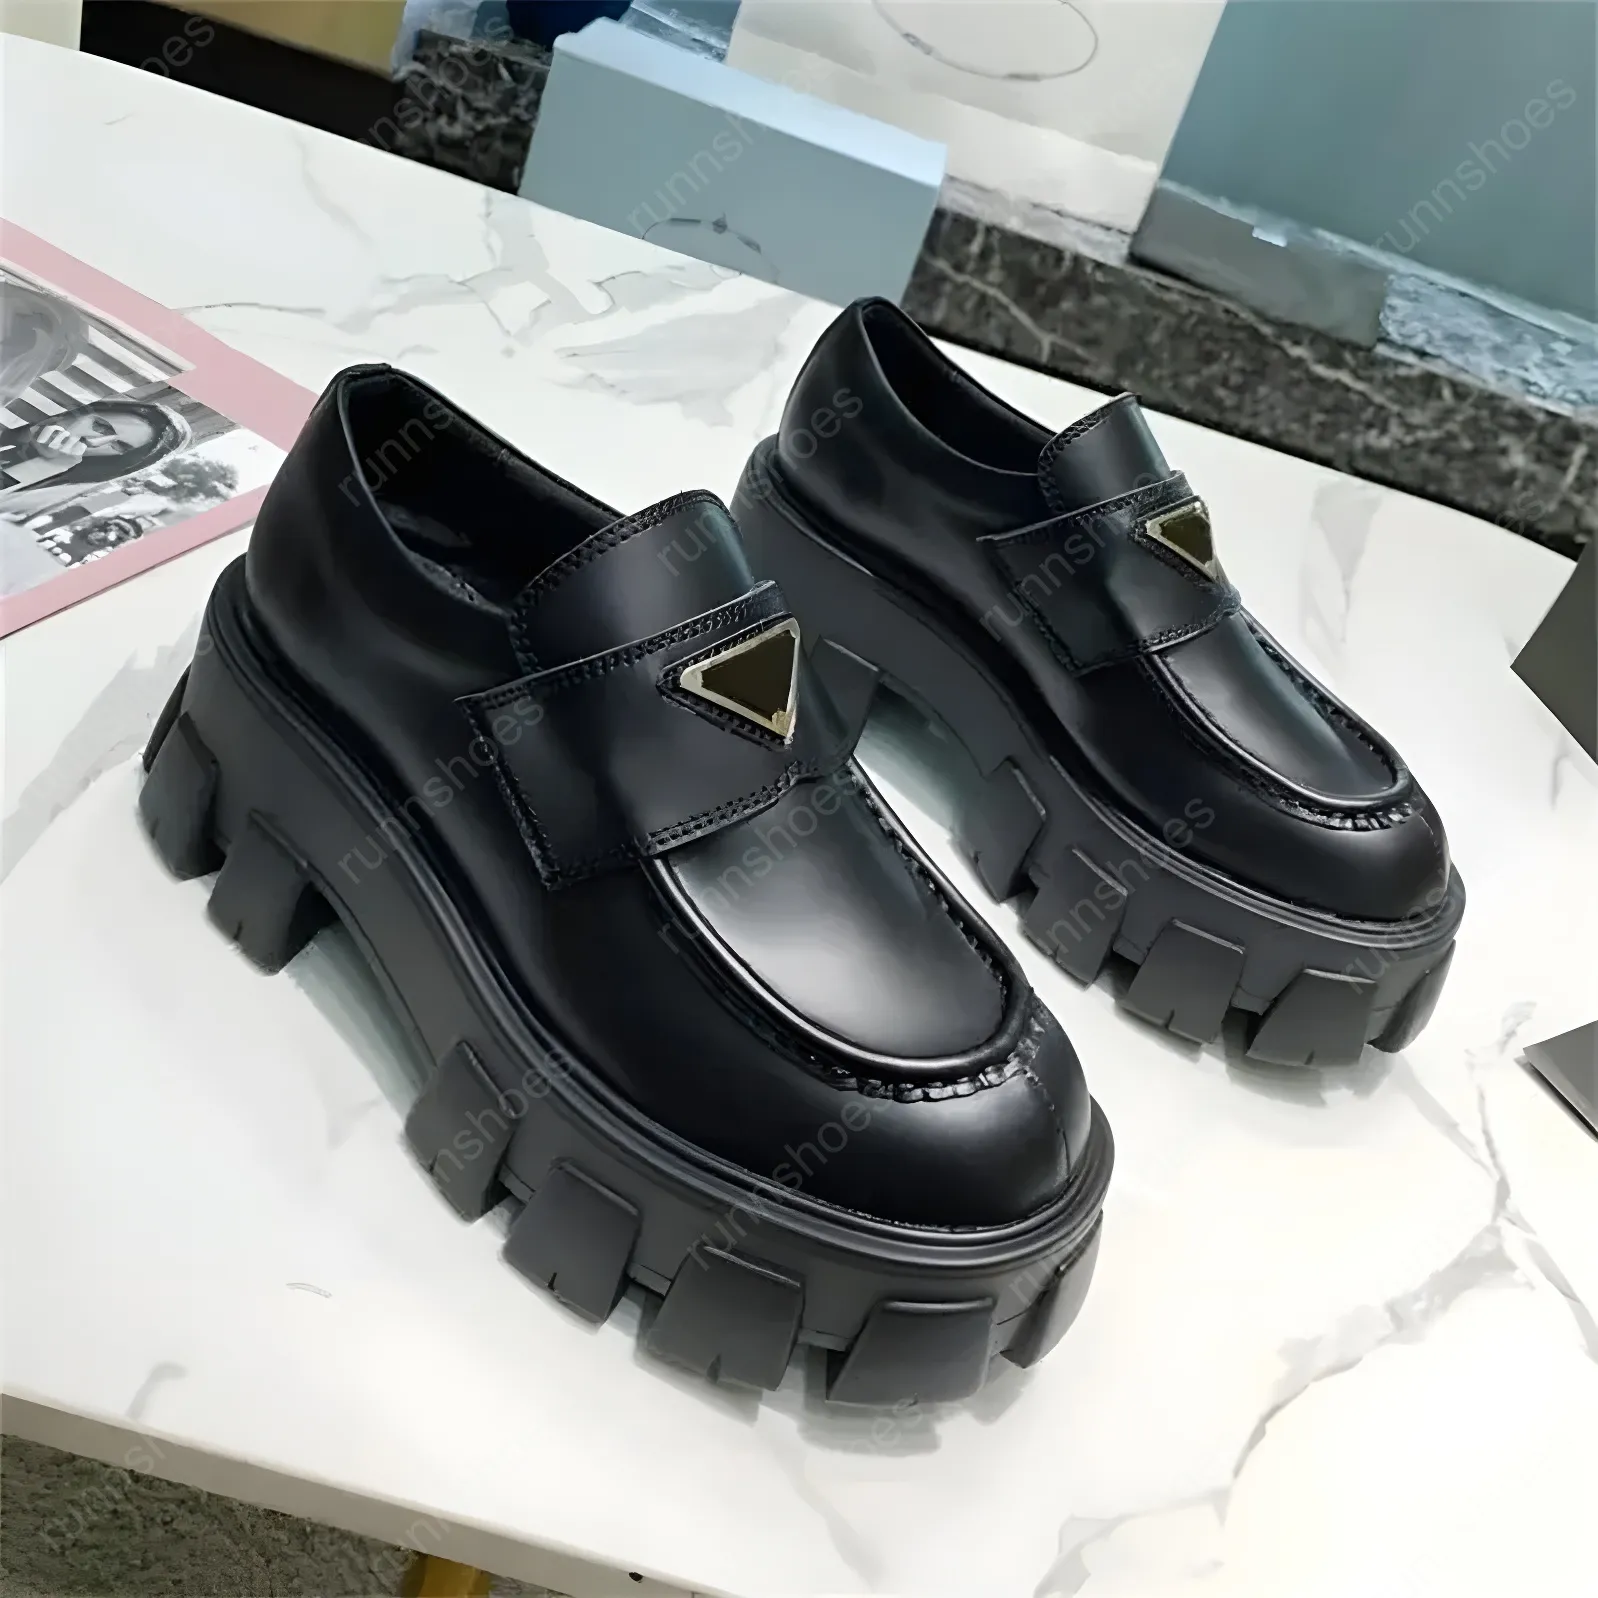 Loafers Designer Shoes Soft Cowhide Platform Sneakers Rubber Black Shiny Leather Chunky Round Head Sneaker Thick Bottom Shoe size 35-41